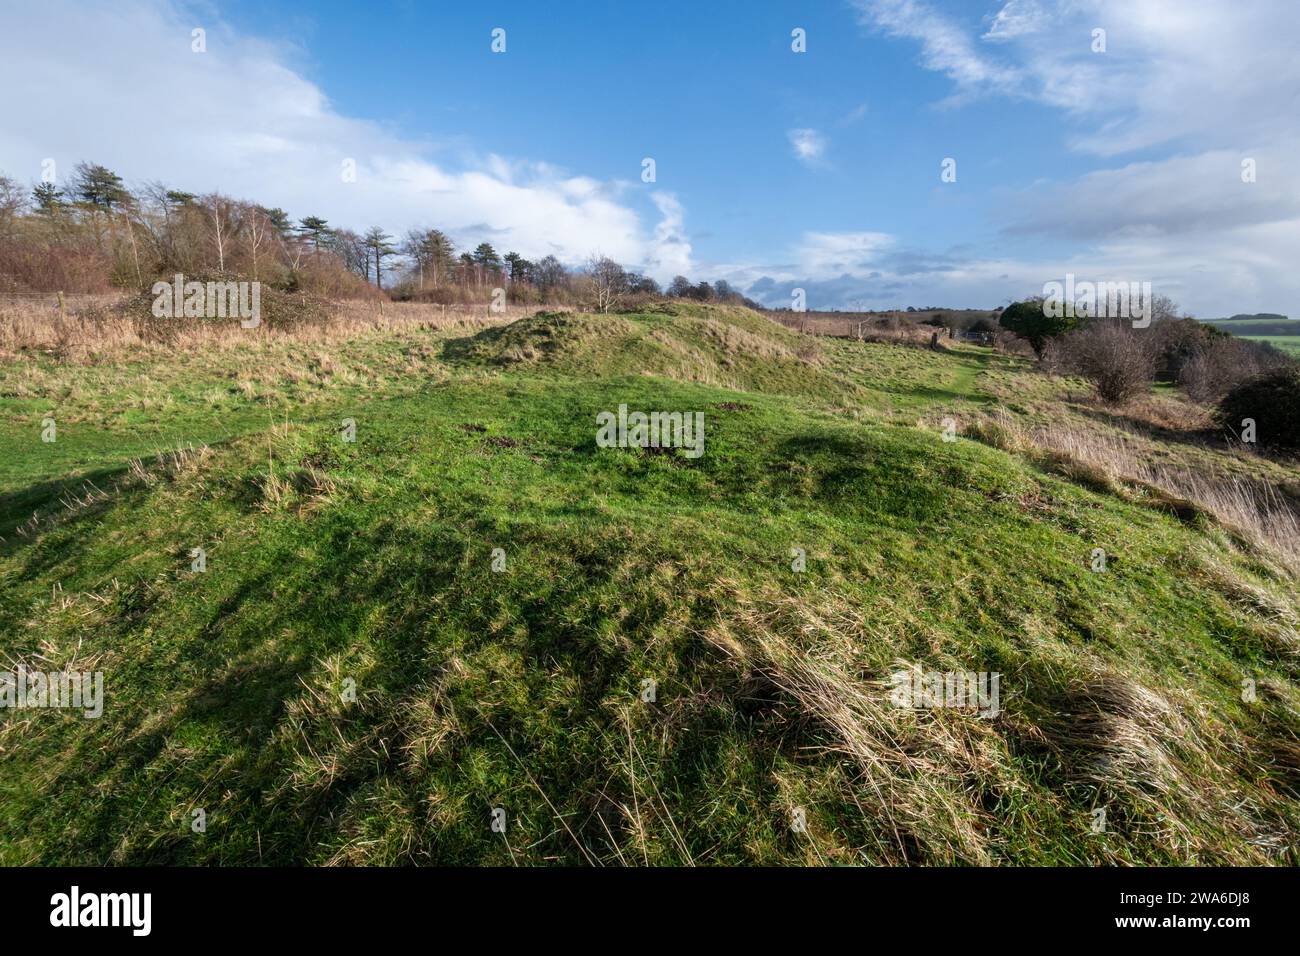 Bronze Age Round Barrows or tumuli on Magdalen Hill Down nature reserve near Winchester, England, UK. These are Scheduled Ancient Monuments. Stock Photo